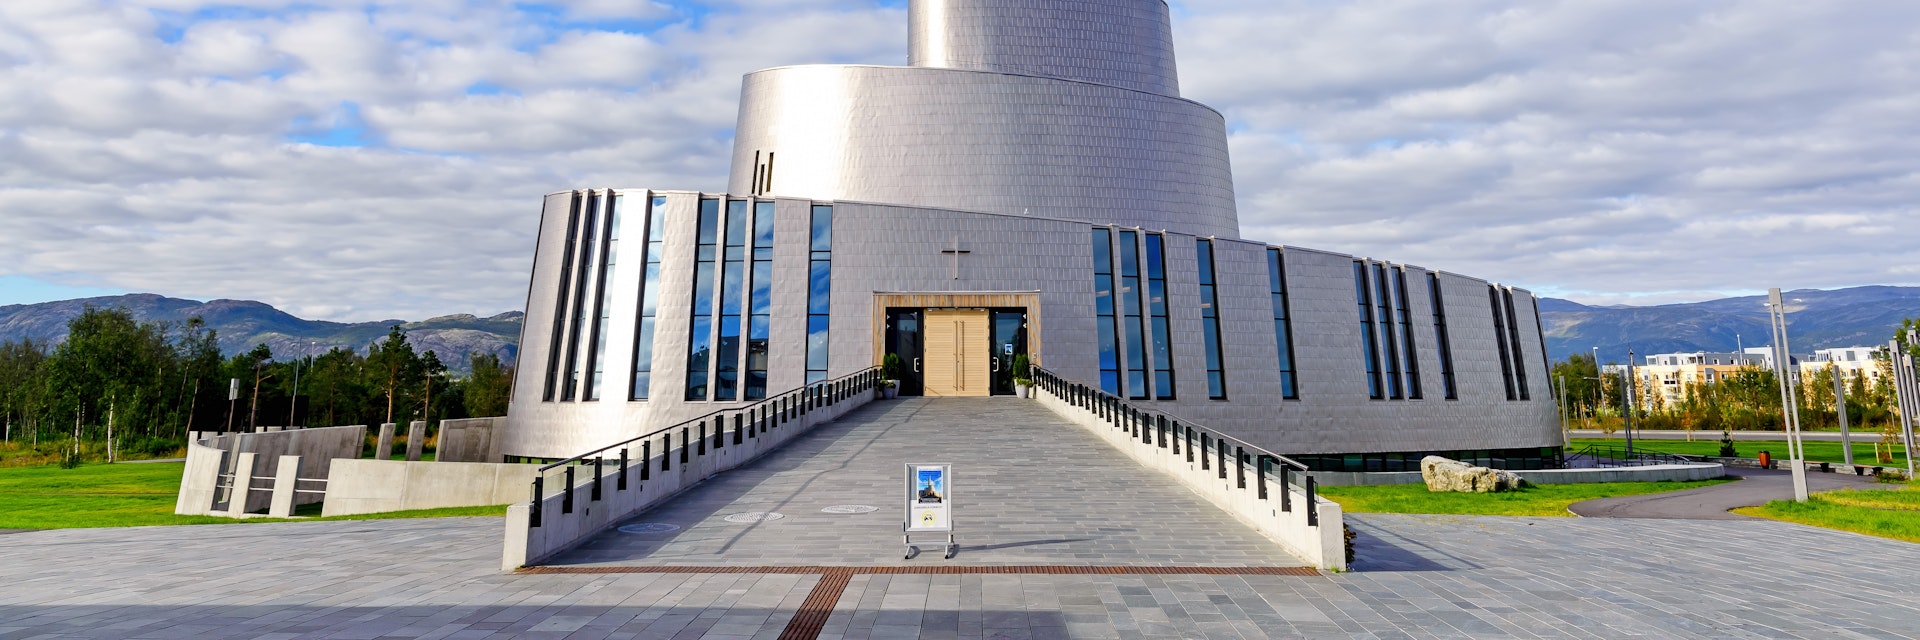 The main entrance side of the Northern Lights Cathedral.